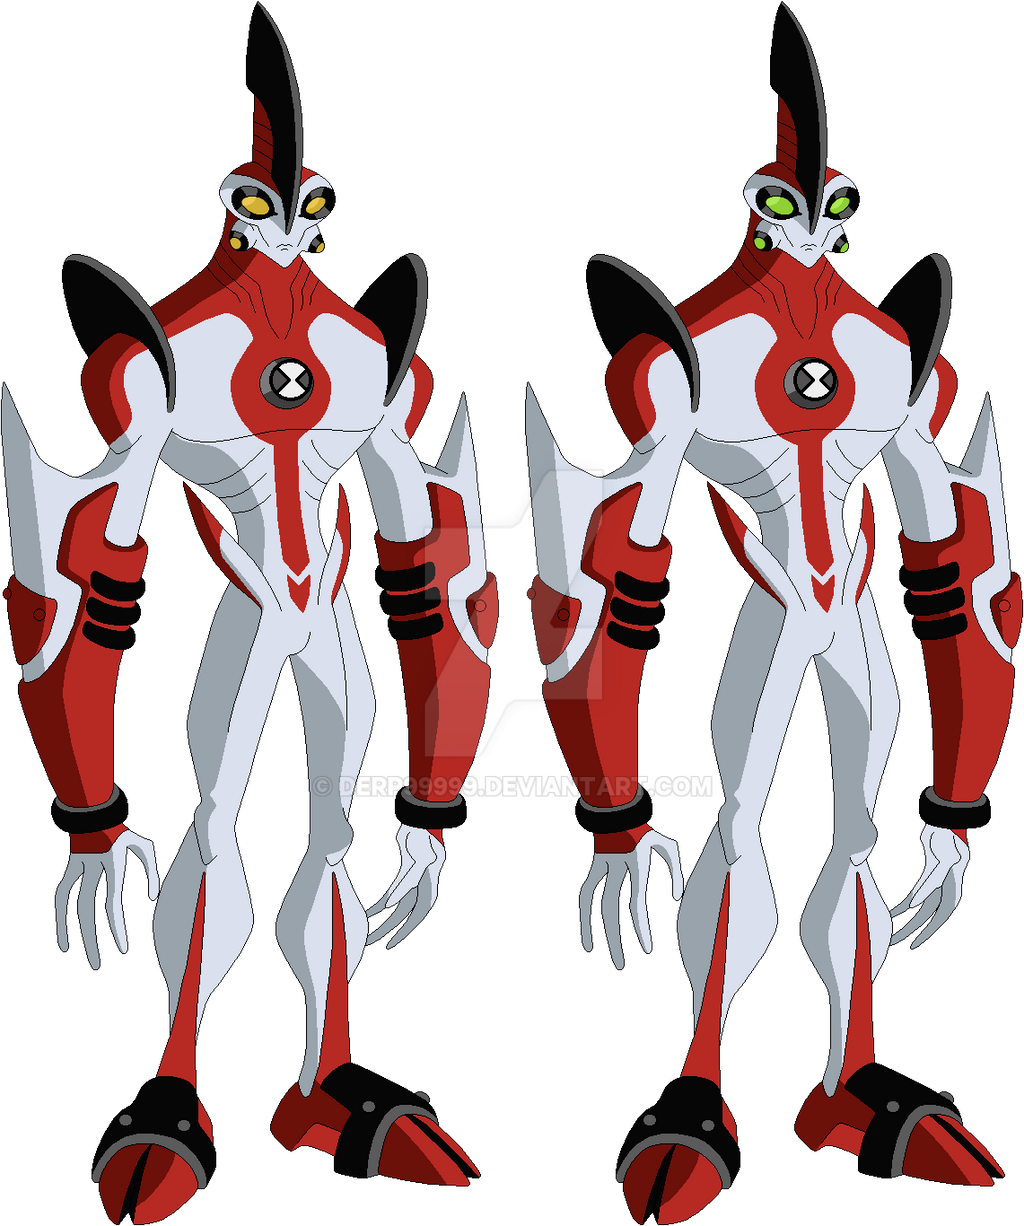 Way big is the omnitrix's dna sample of an to'kustar. 